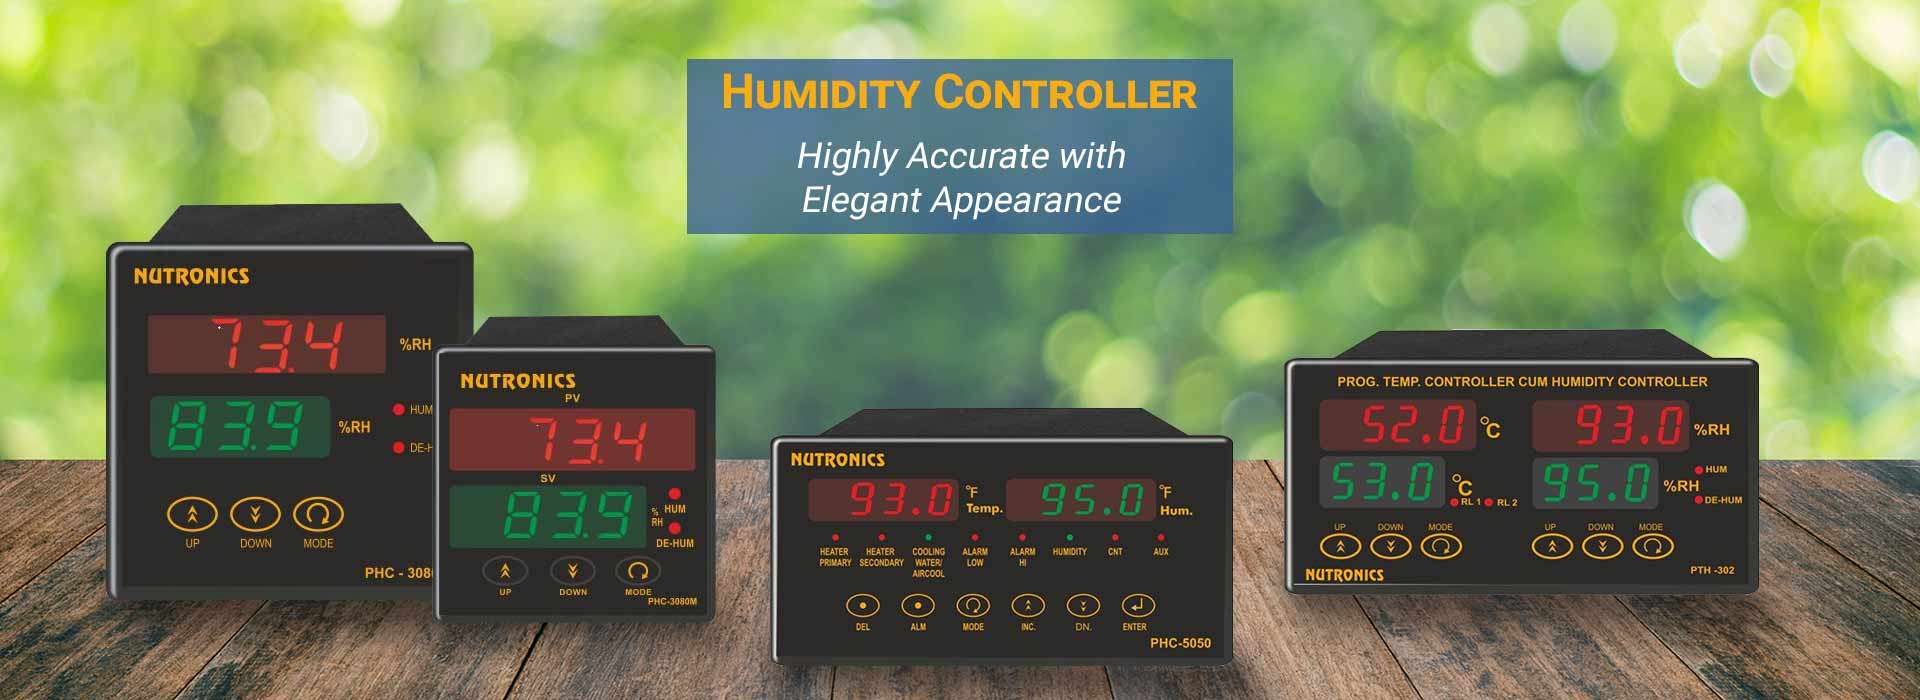  Humidity controller Manufacturers in Visakhapatnam